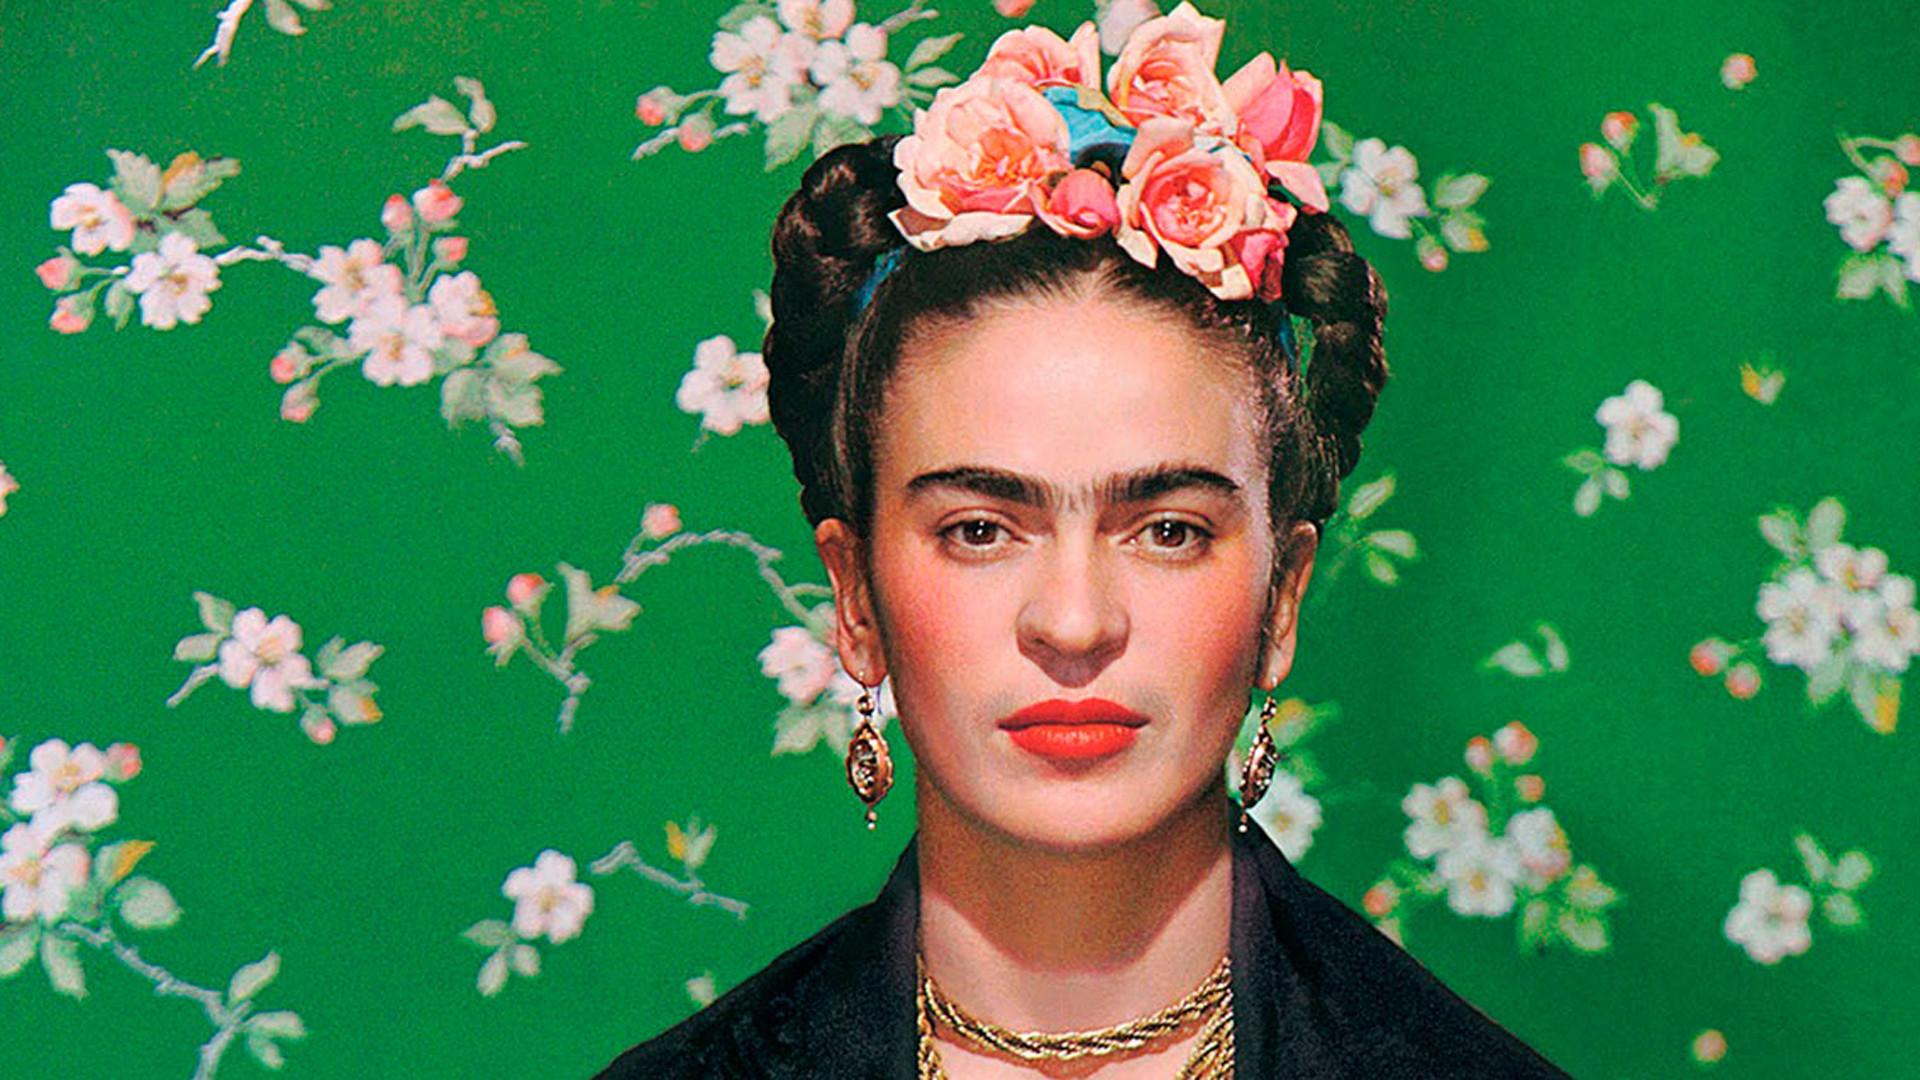 Free download Frida Kahlo Wallpapers the best 52 images in 2018